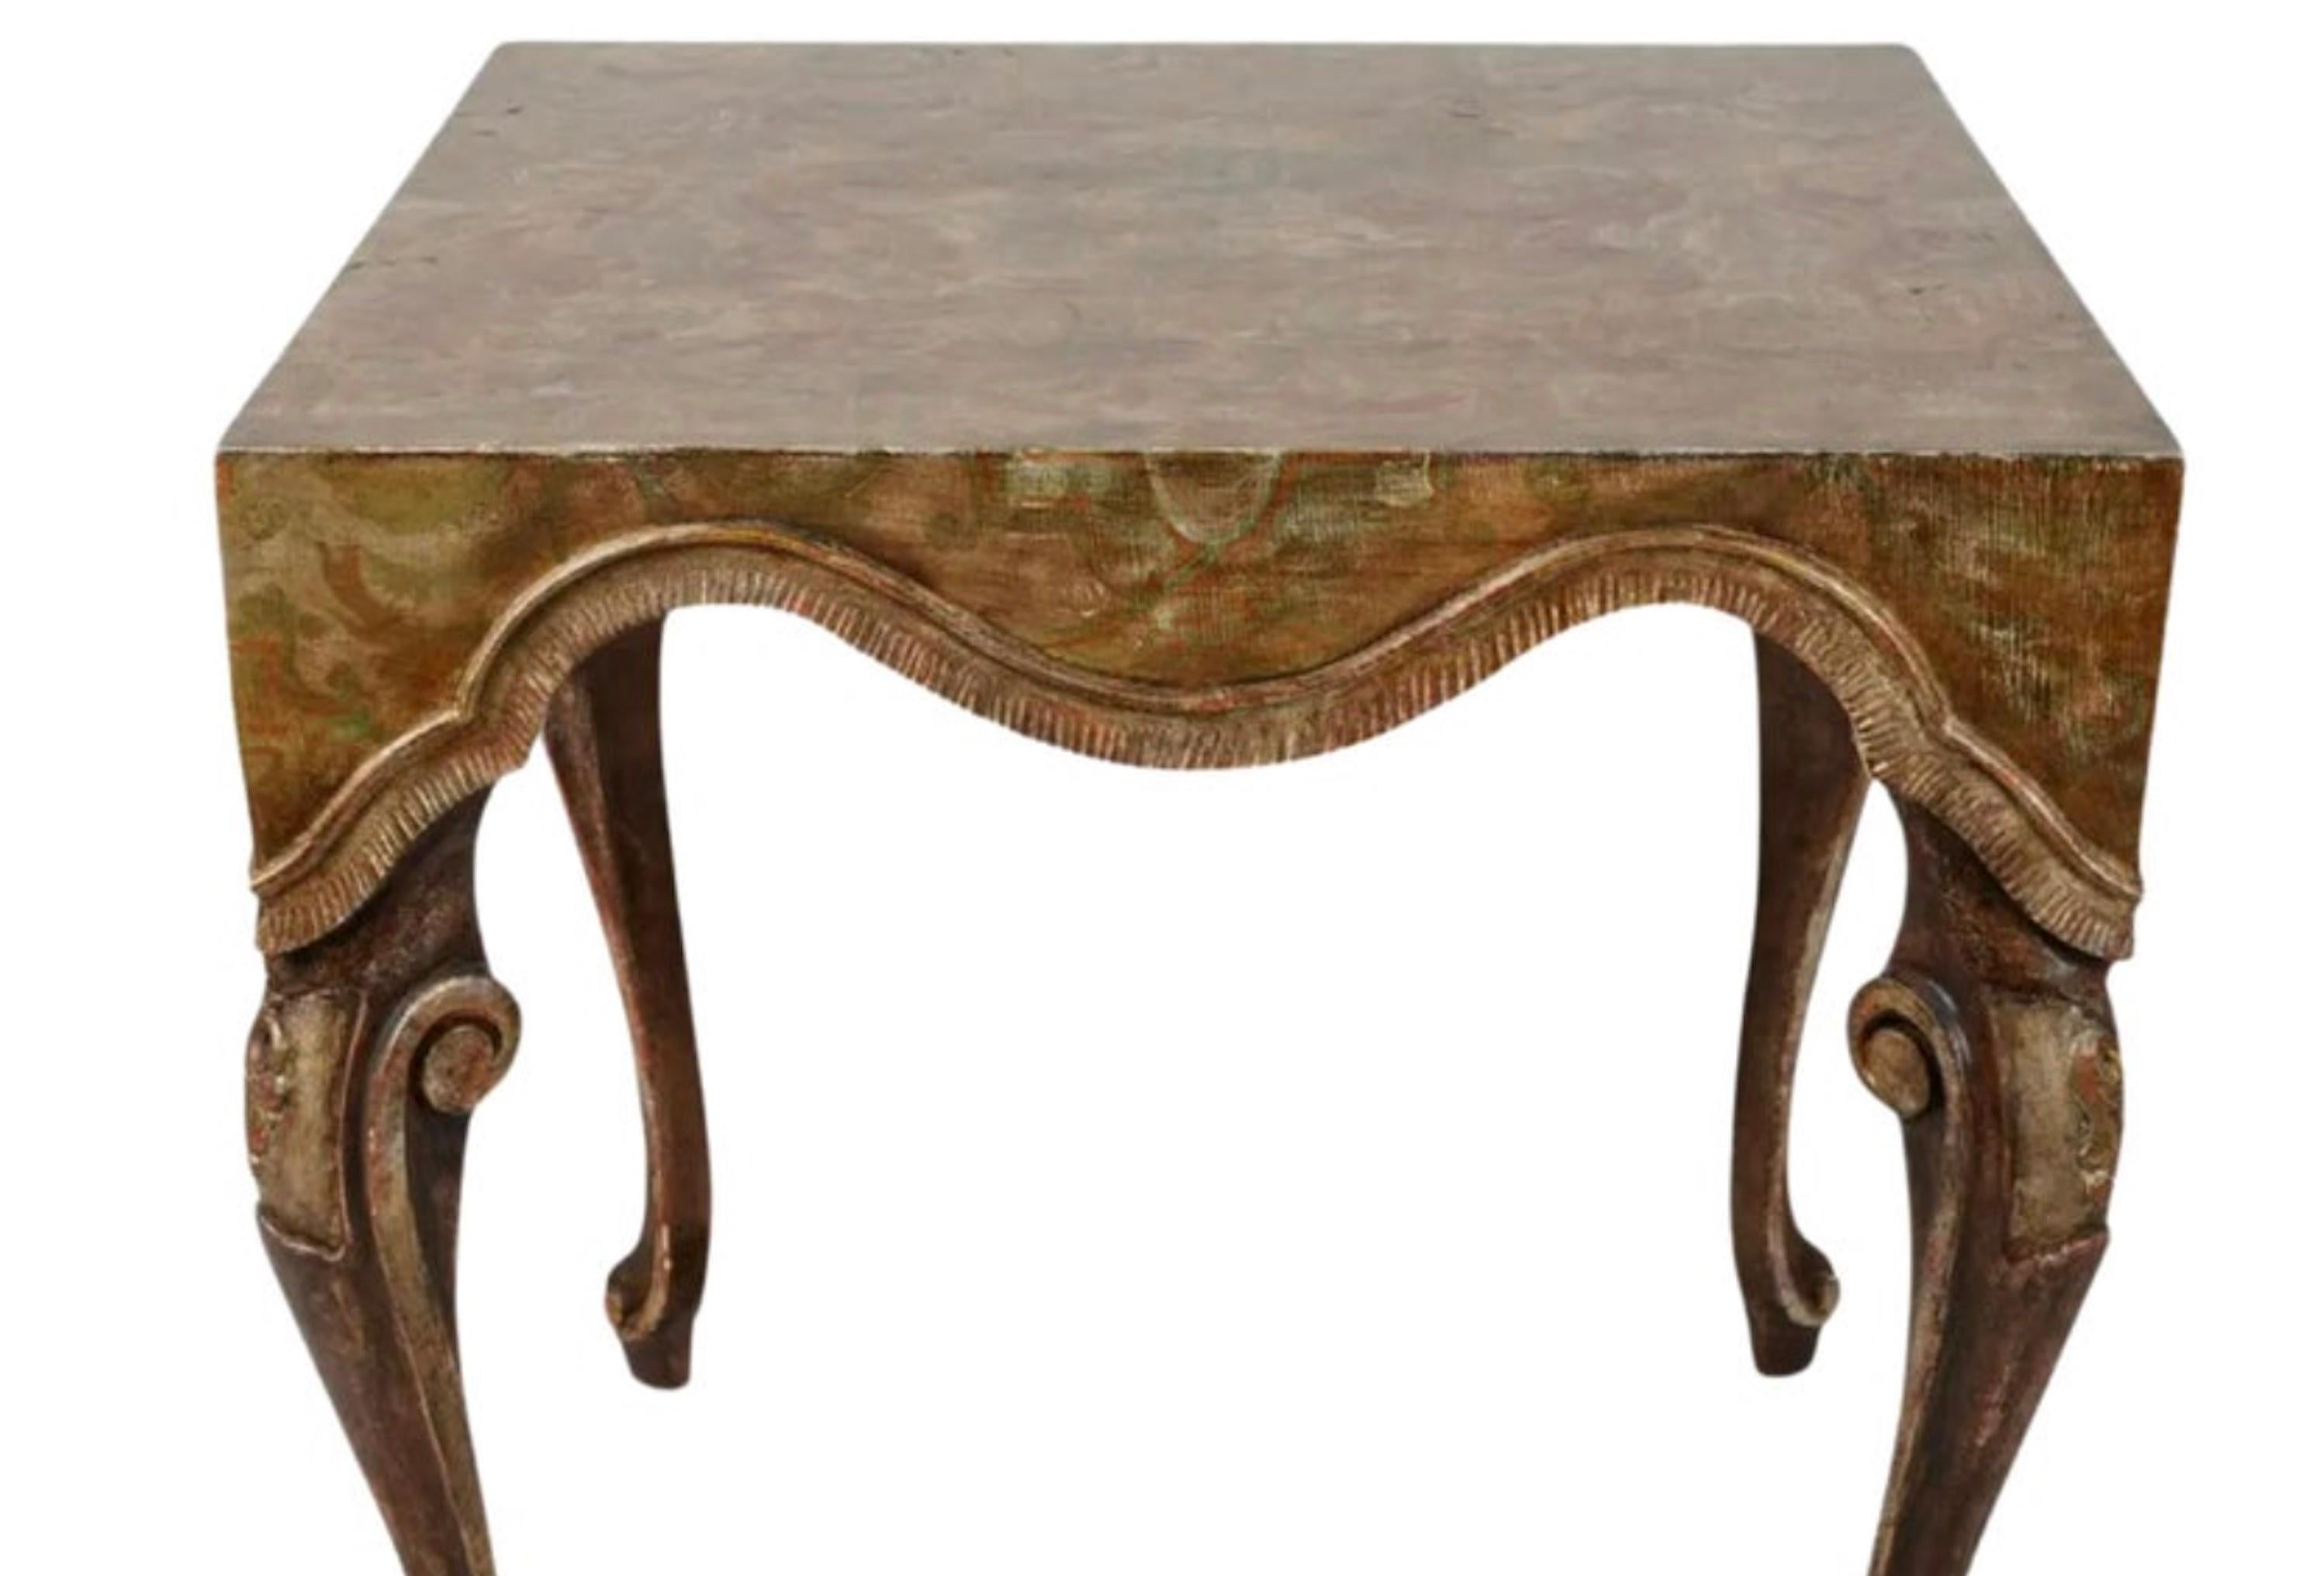 Venetian Fortuny Style Polychrome Painted Giltwood Side Table, Mid-20th Century In Good Condition For Sale In LOS ANGELES, CA